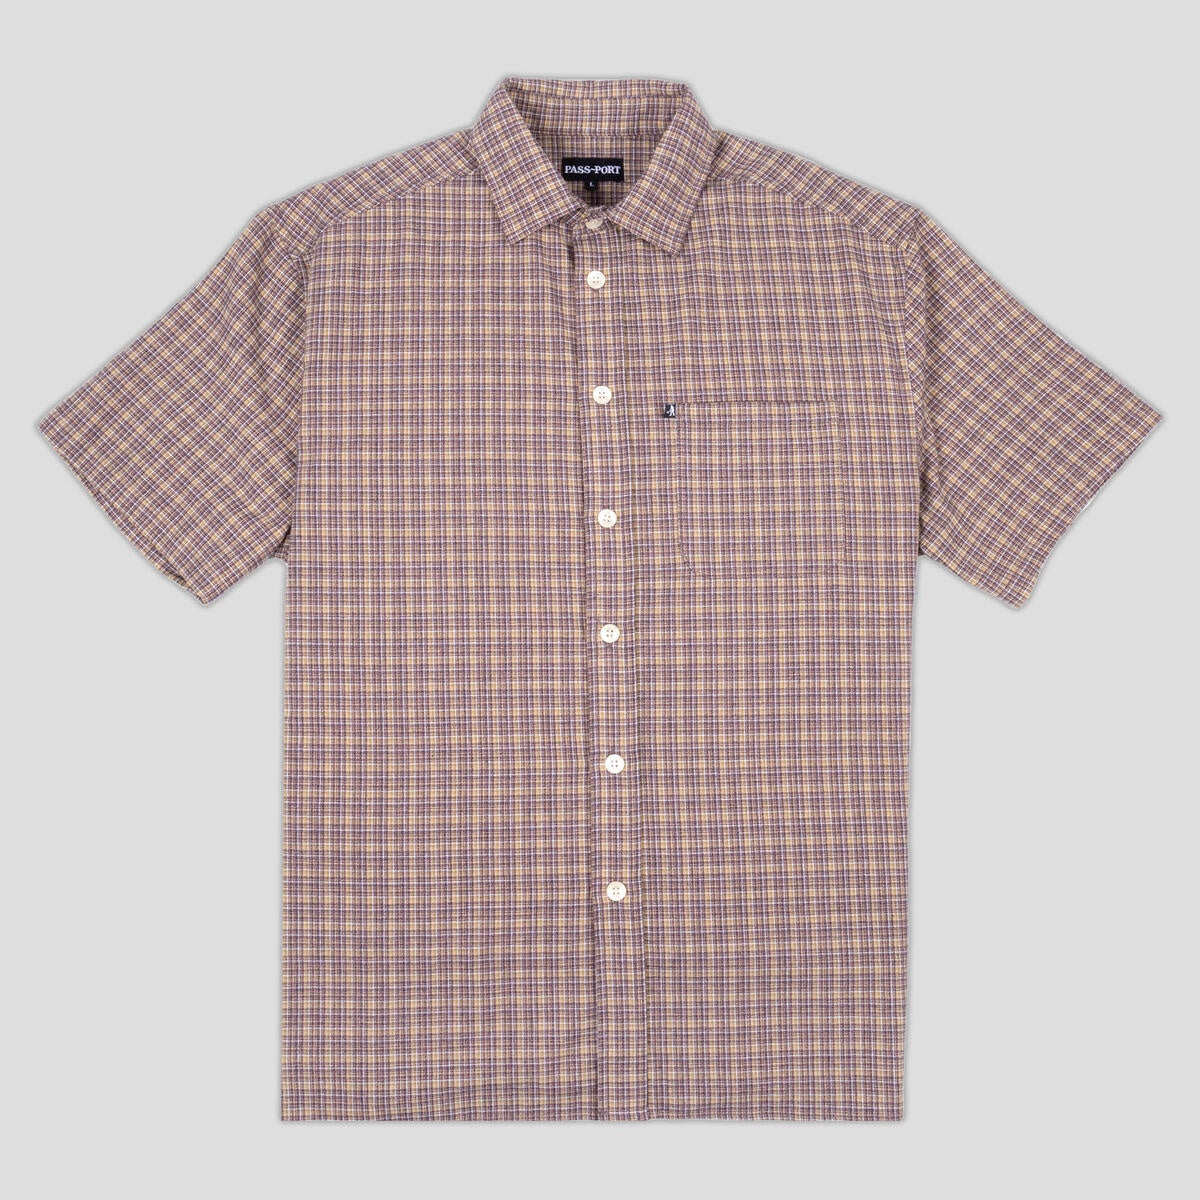 Workers Check S/S Shirt - Honeycomb